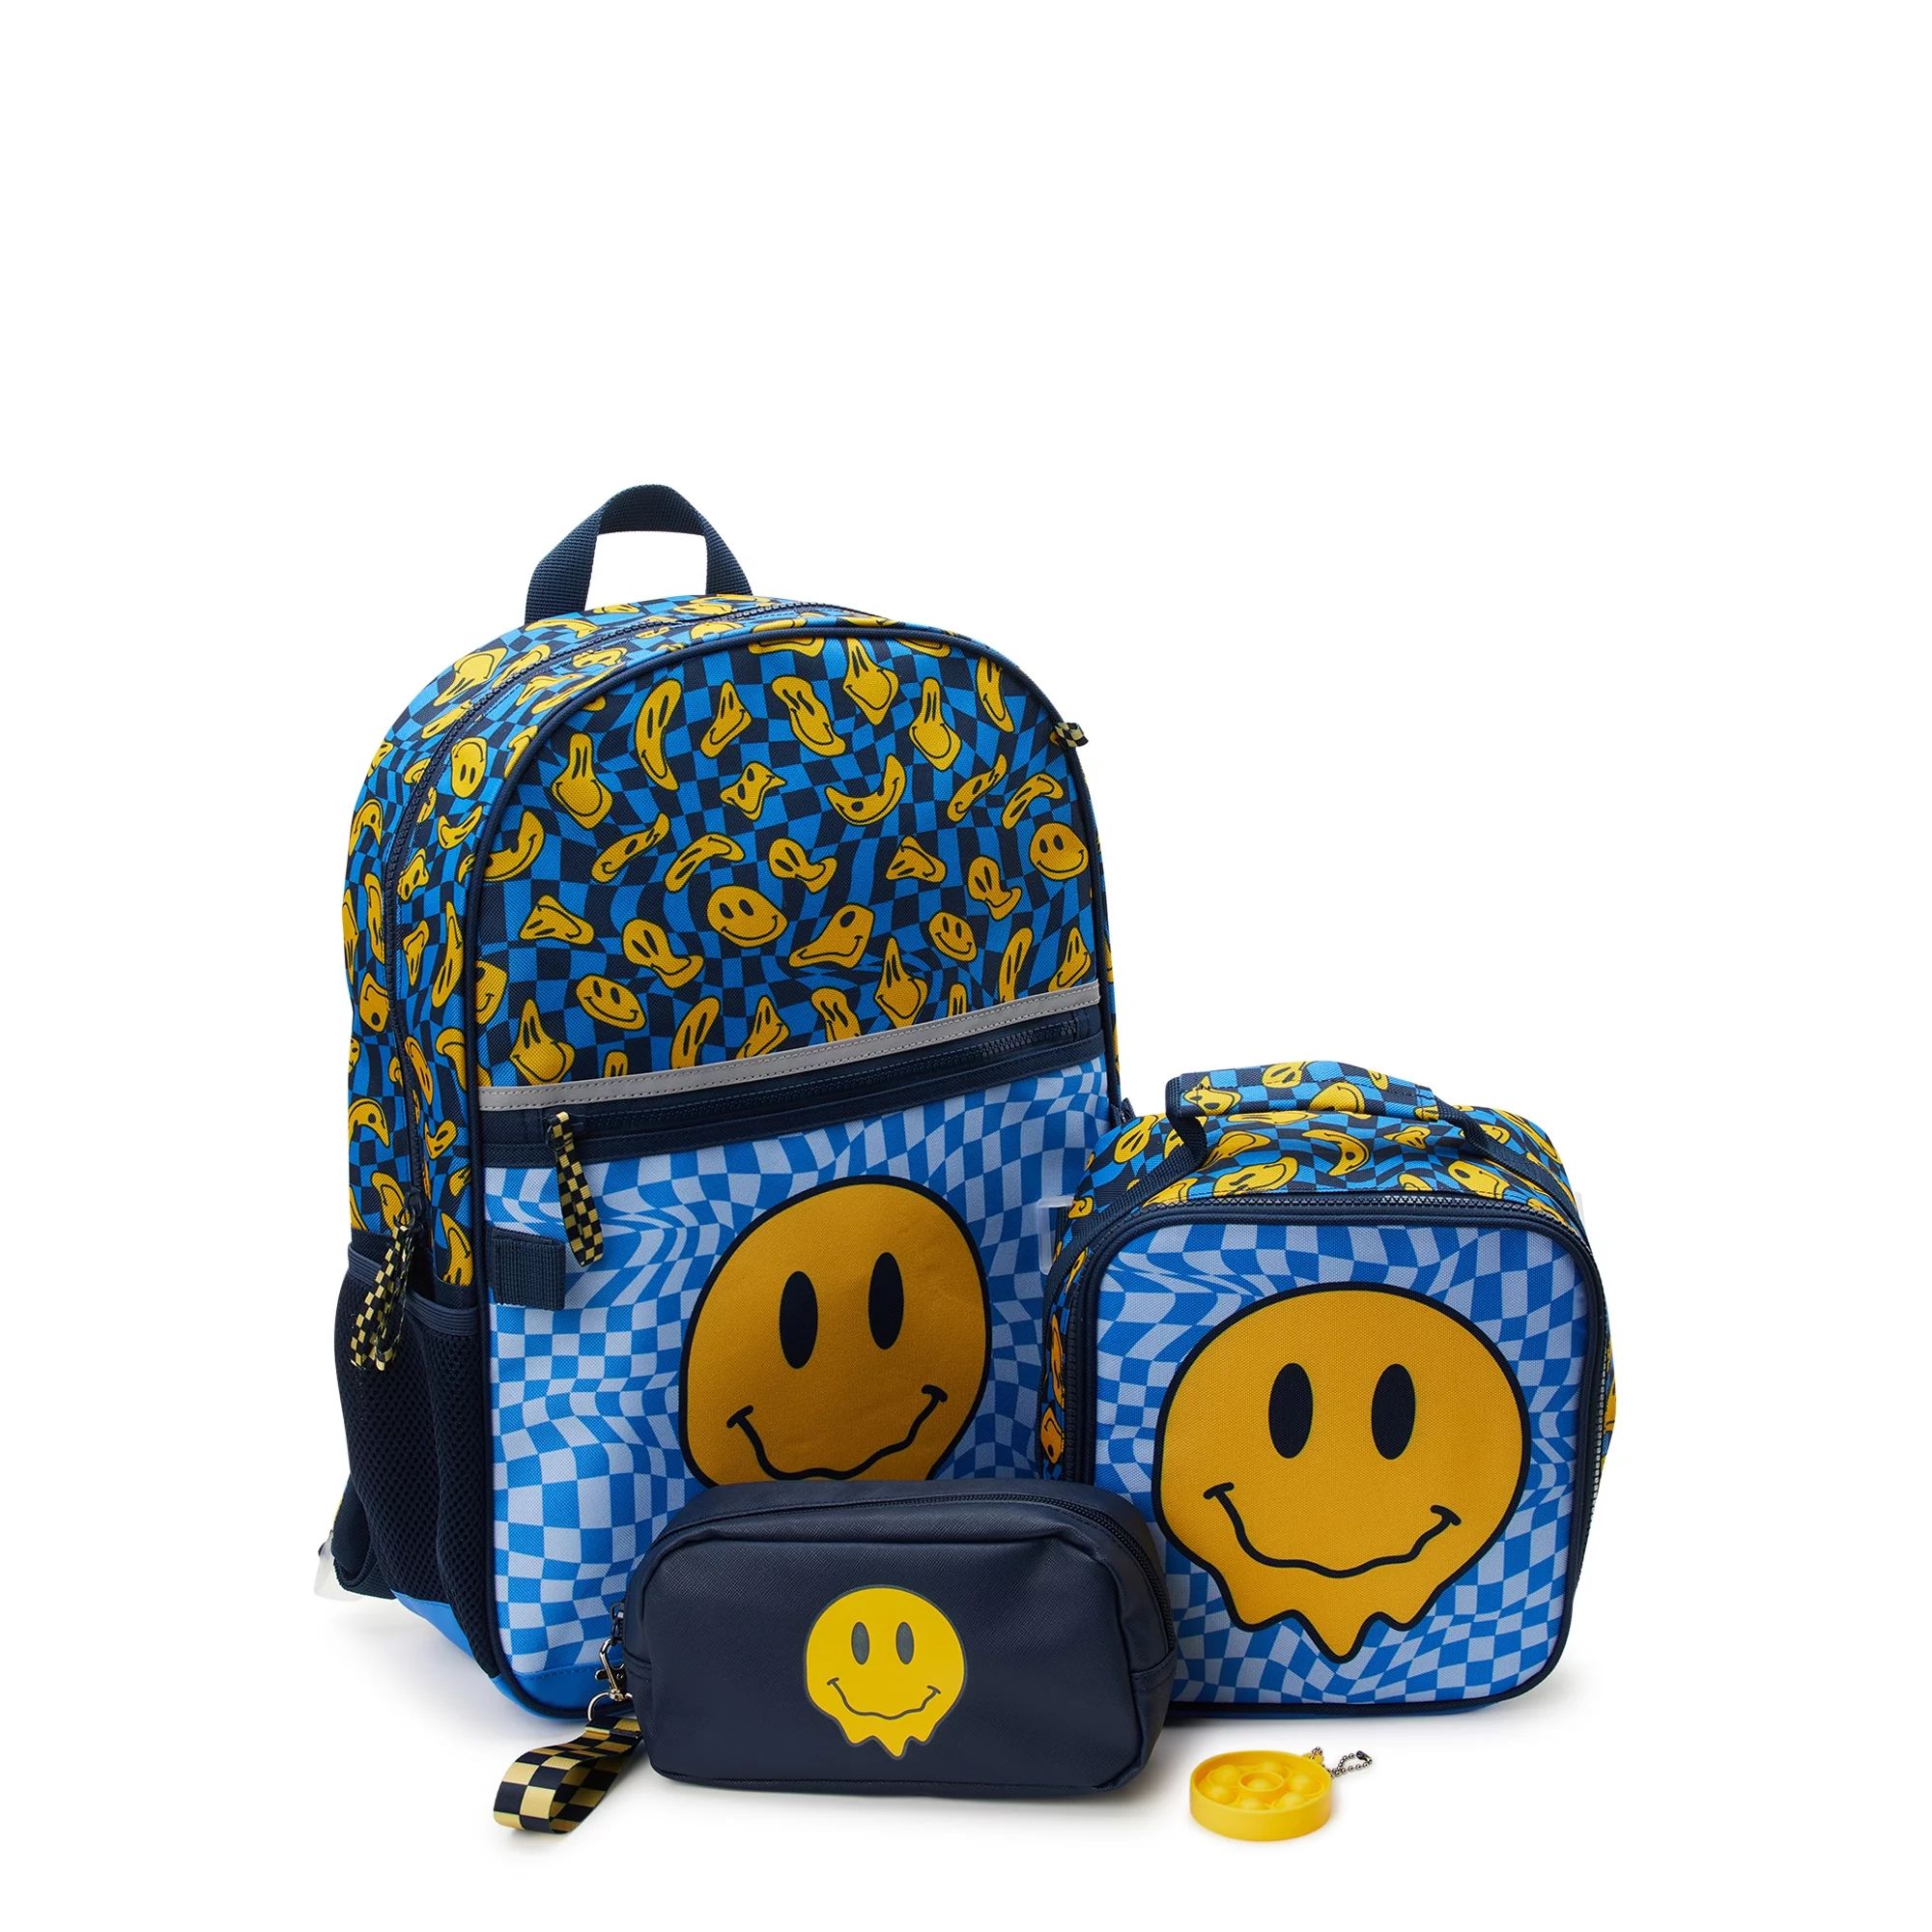 Wonder Nation Kids 17" Laptop Backpack and Lunch Tote Set, 4-Piece, Smiley Print Blue Cove | Walmart (US)